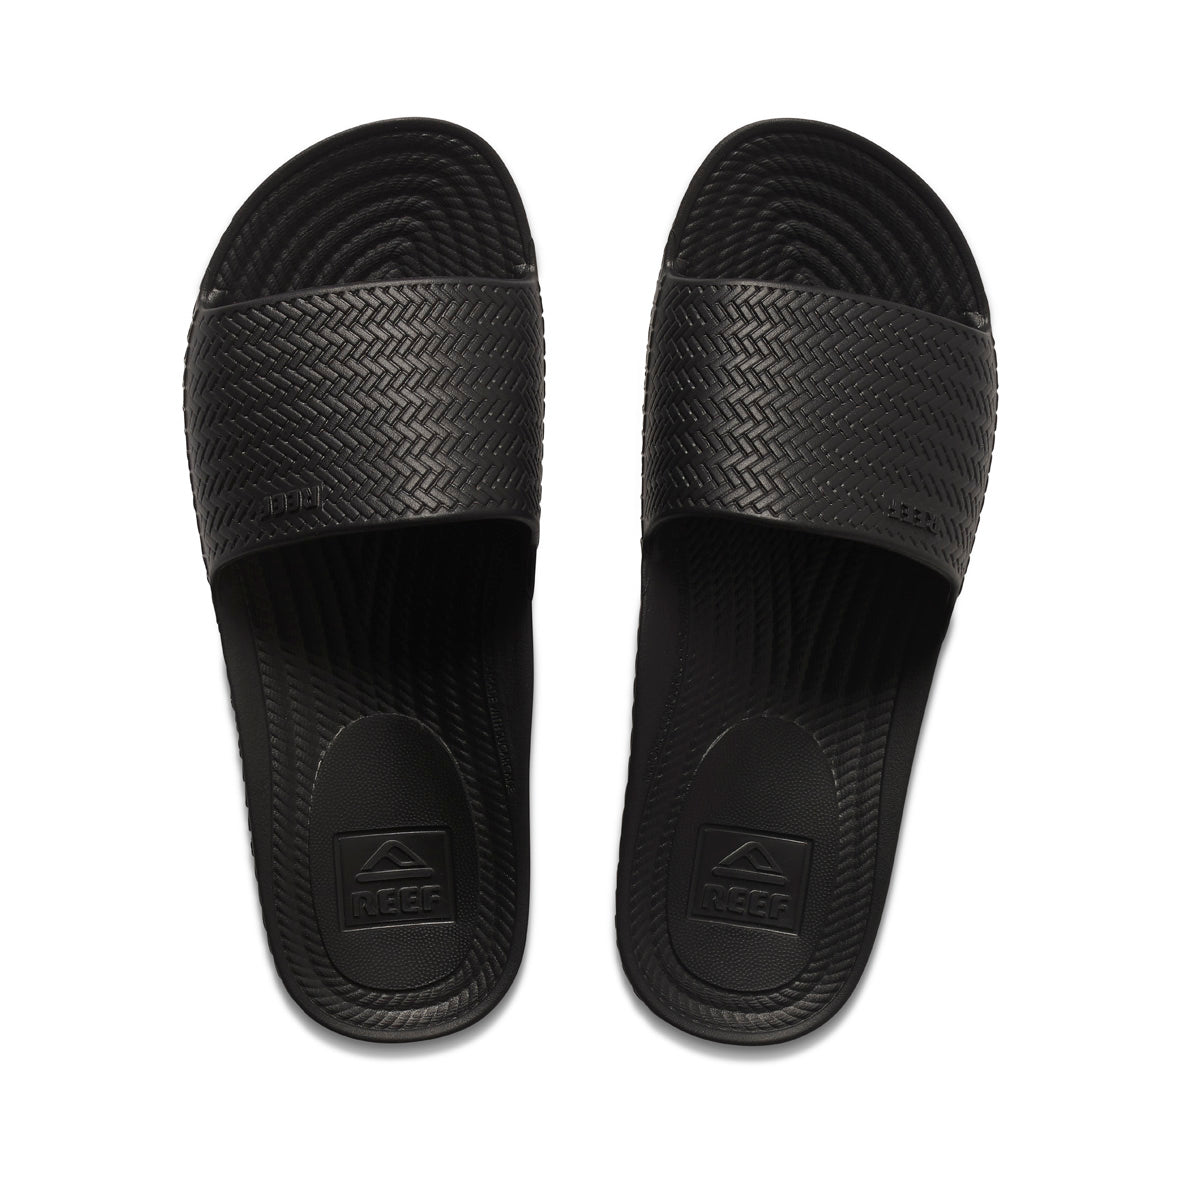 REEF  Womens Sandals and Shoes